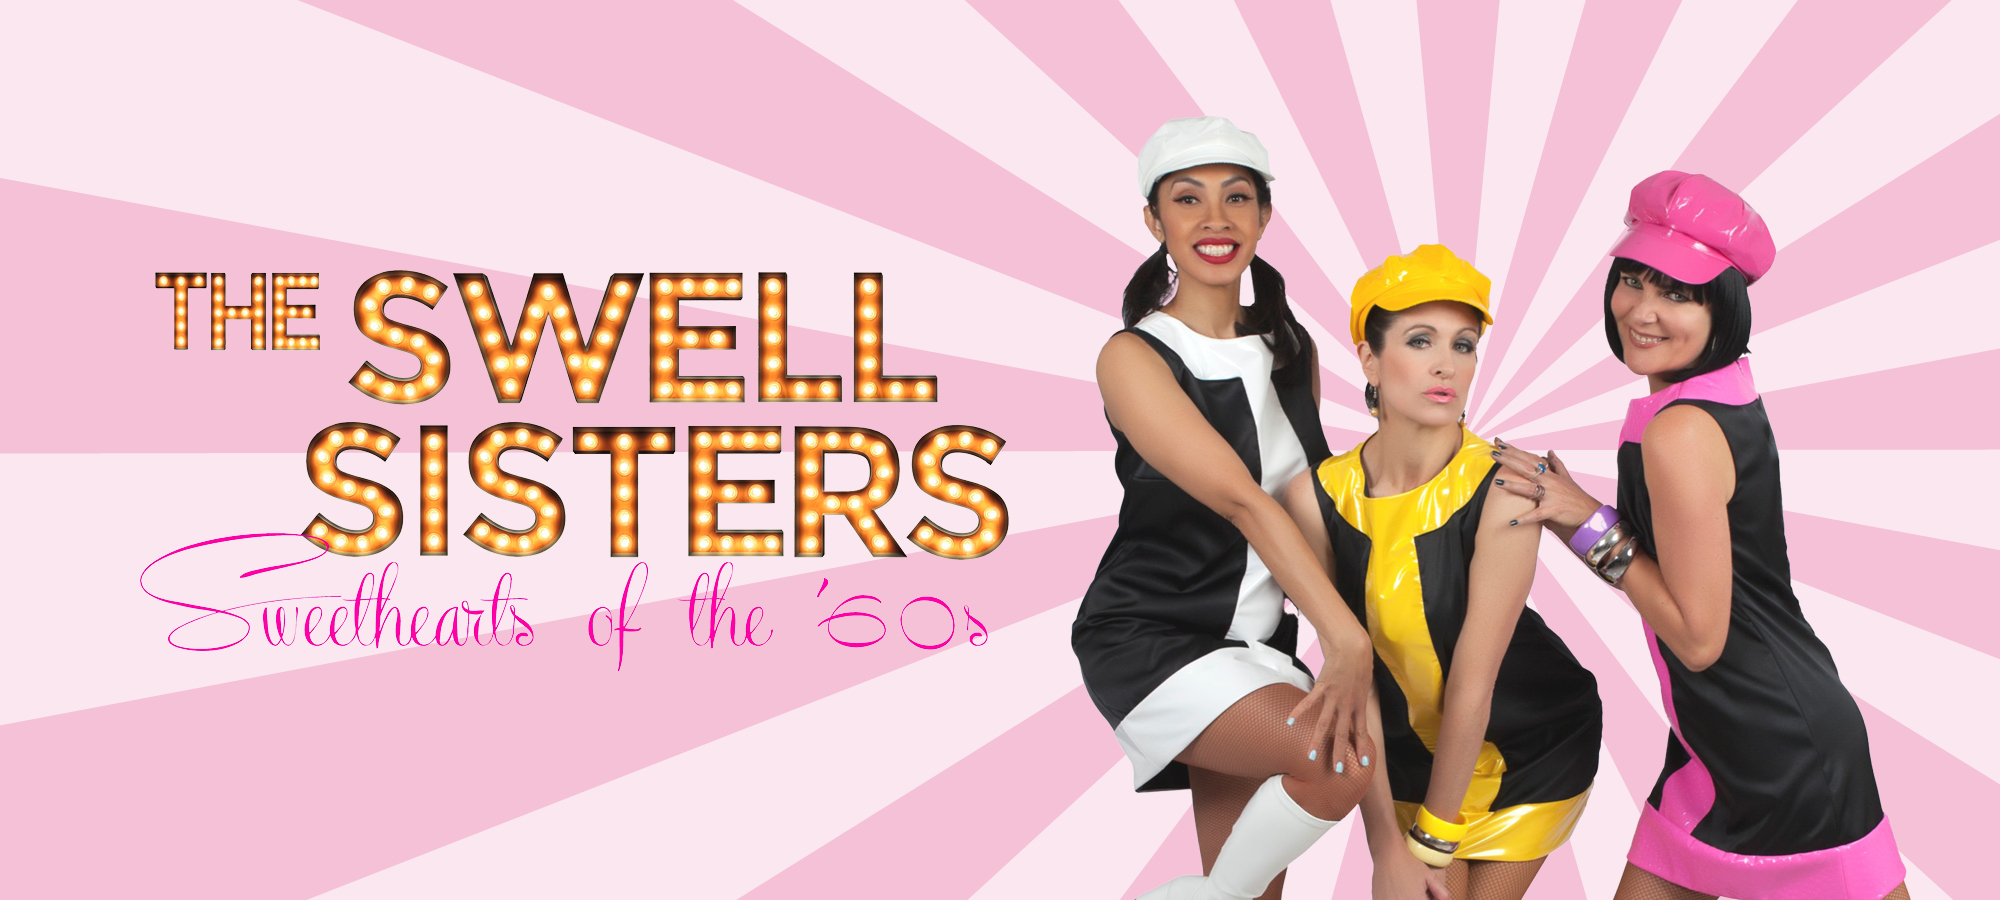 The Swell Sisters